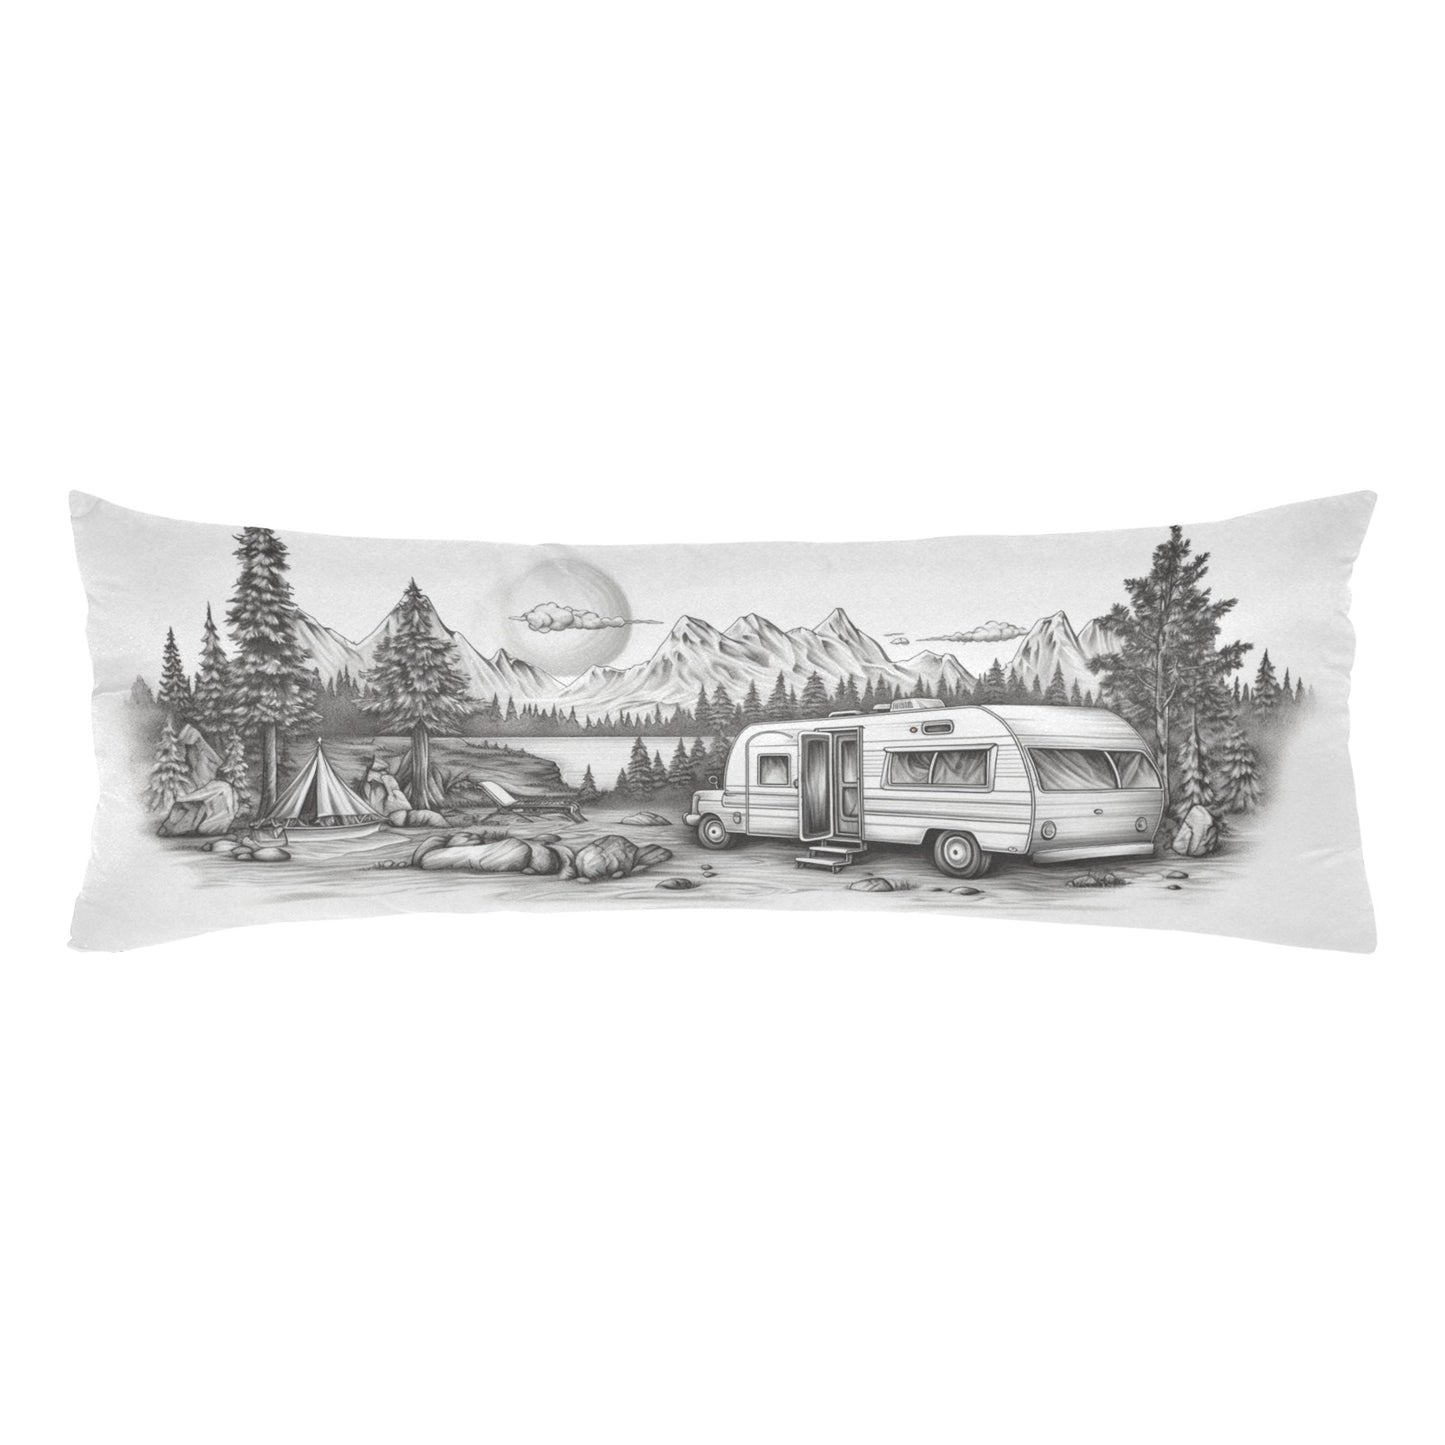 Camping Body Pillow Case, Mountains Outdoor Camper RV Black White Long Large Bed Accent Print Throw Decor Decorative Cover 20x54 Zipper